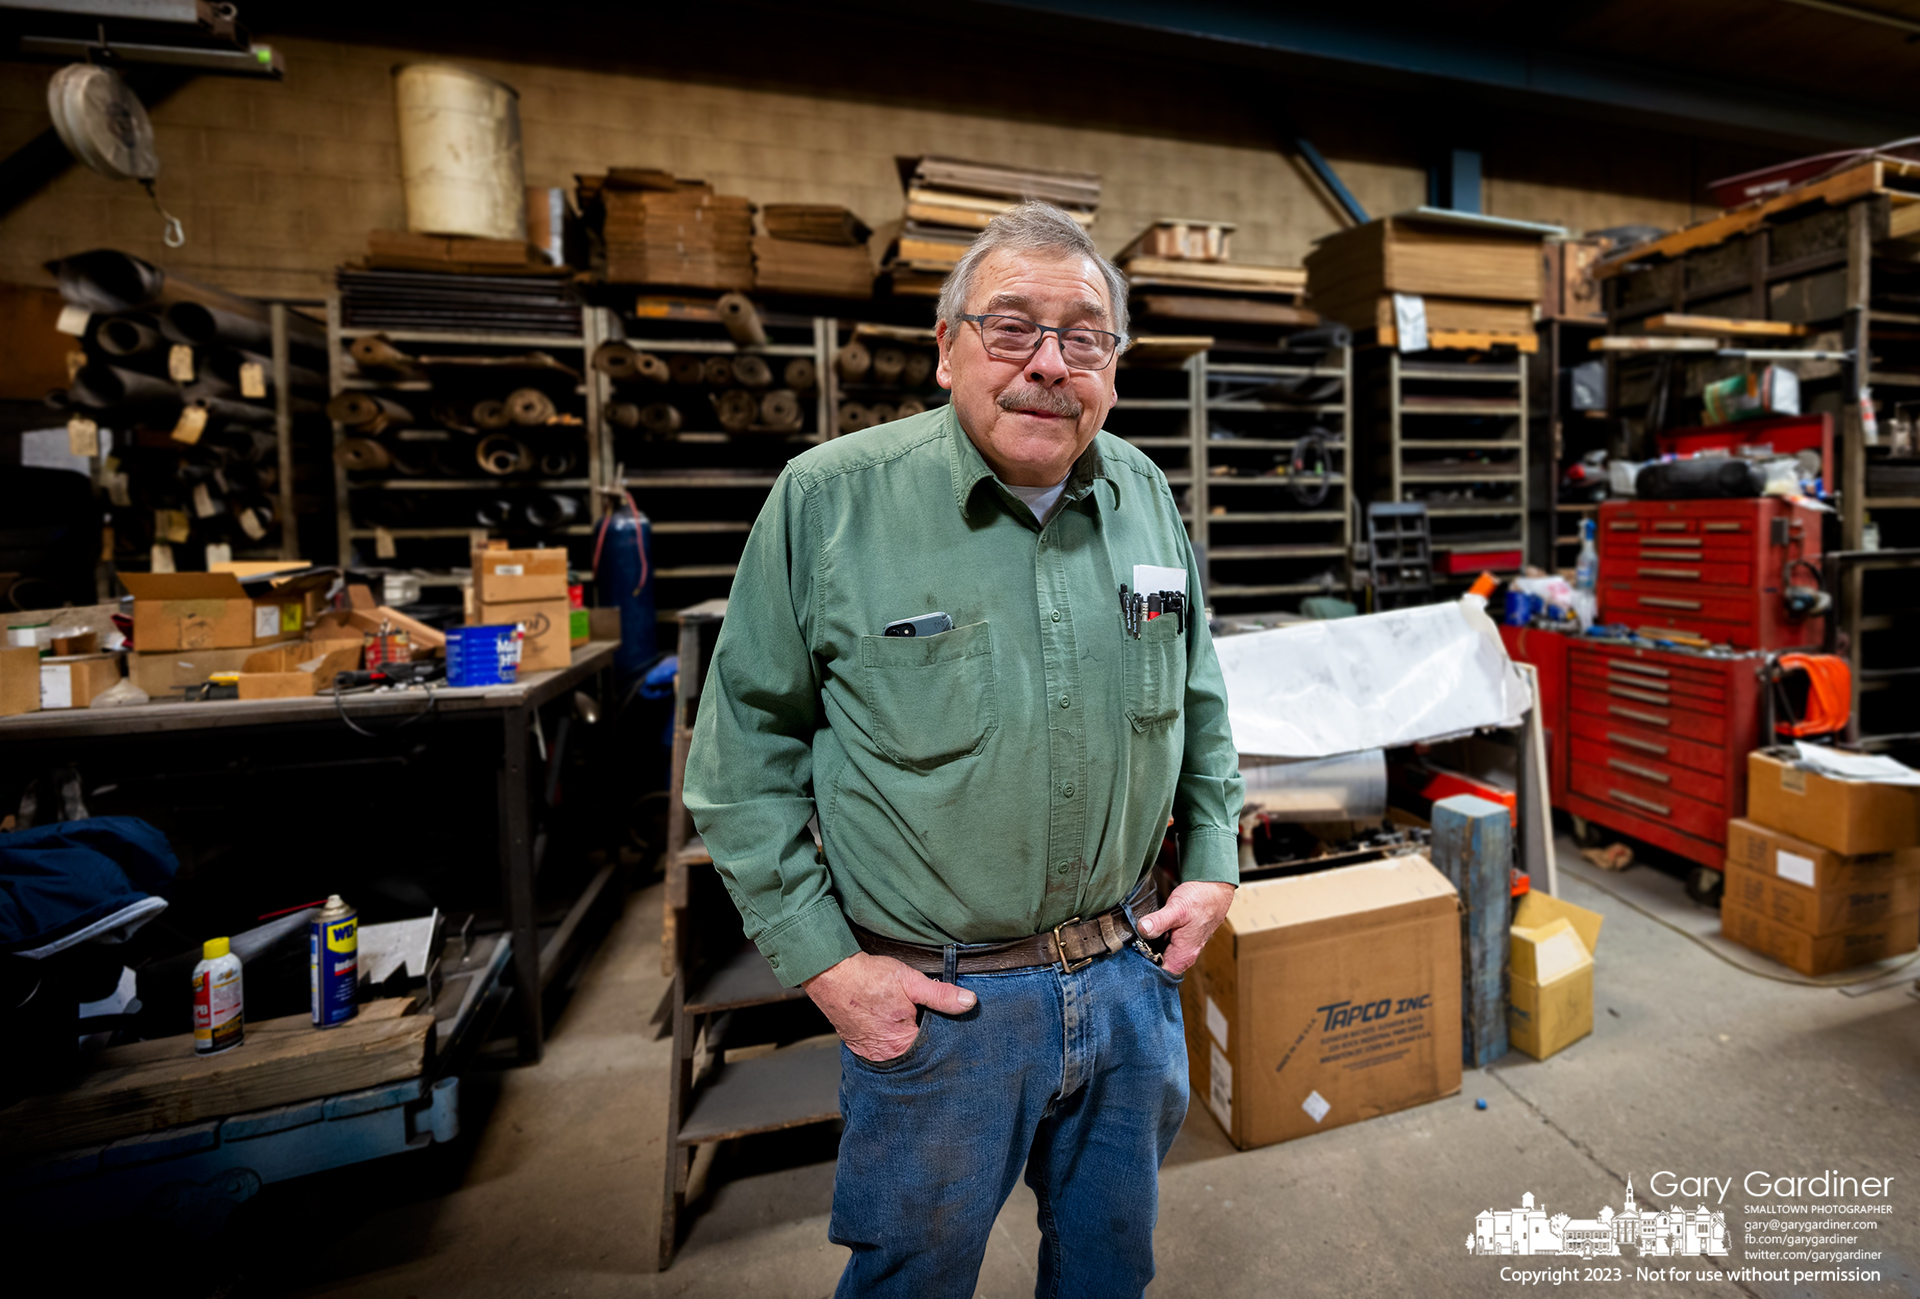 Jim Hance stands in his company workshop where he's helping clear out tools and equipment sold in an online auction as En-Hanced Products closes its doors after more than 100 years manufacturing industrial equipment, agricultural seed sorters, and GoCycles. My Final Photo for January 24, 2023.